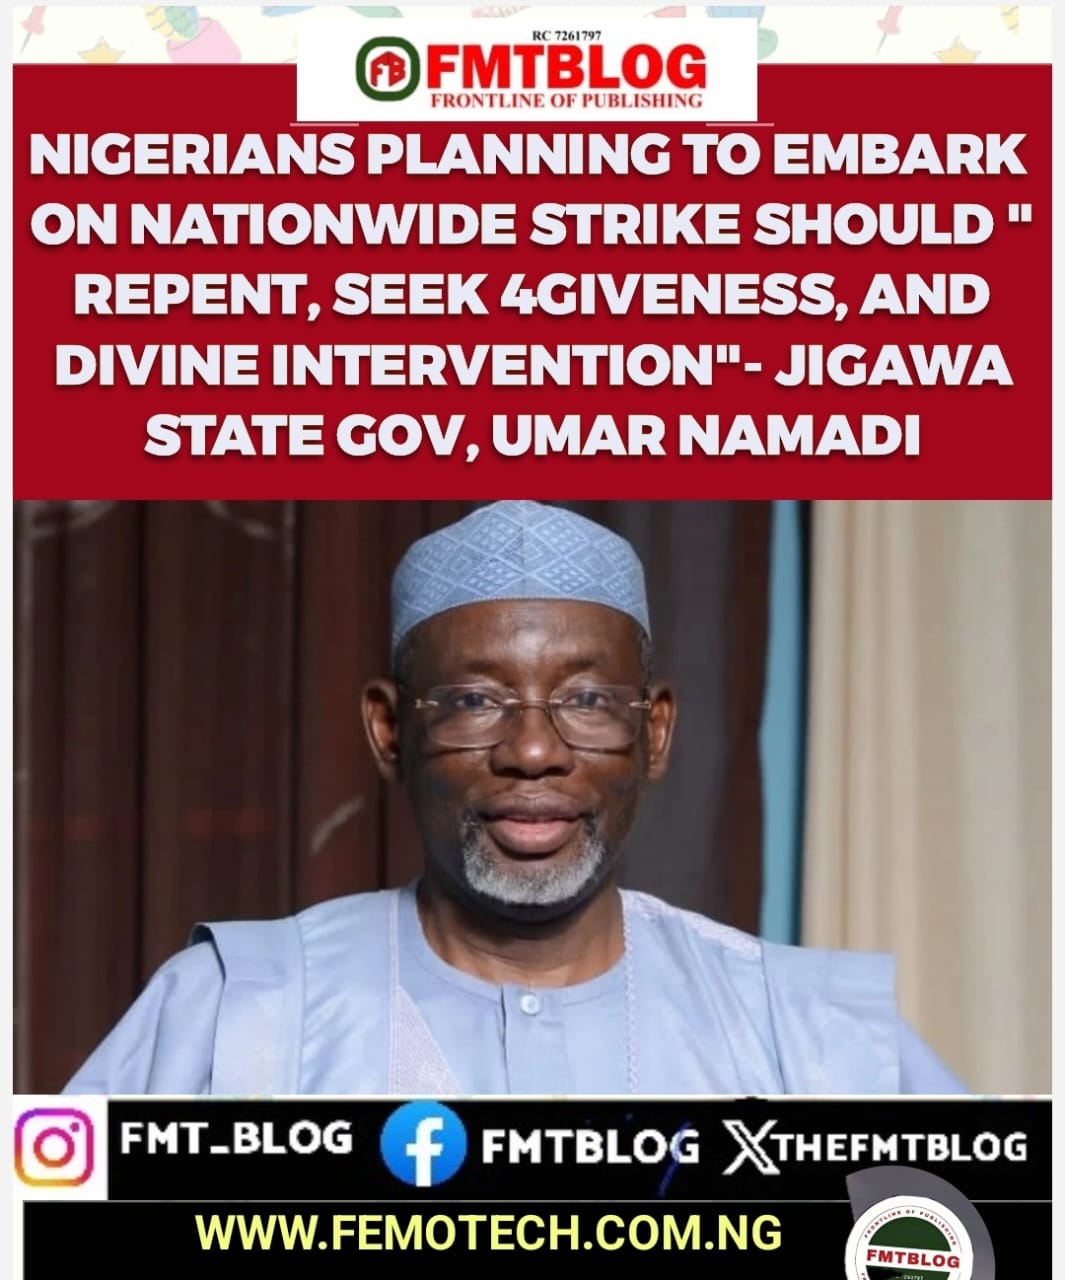 Nigerians Planning To Embark On Nationwide Protest Should ‘Repent, Seek 4giveness And Divine Intervention’ -Jigawa State Gov, Umar Namadi